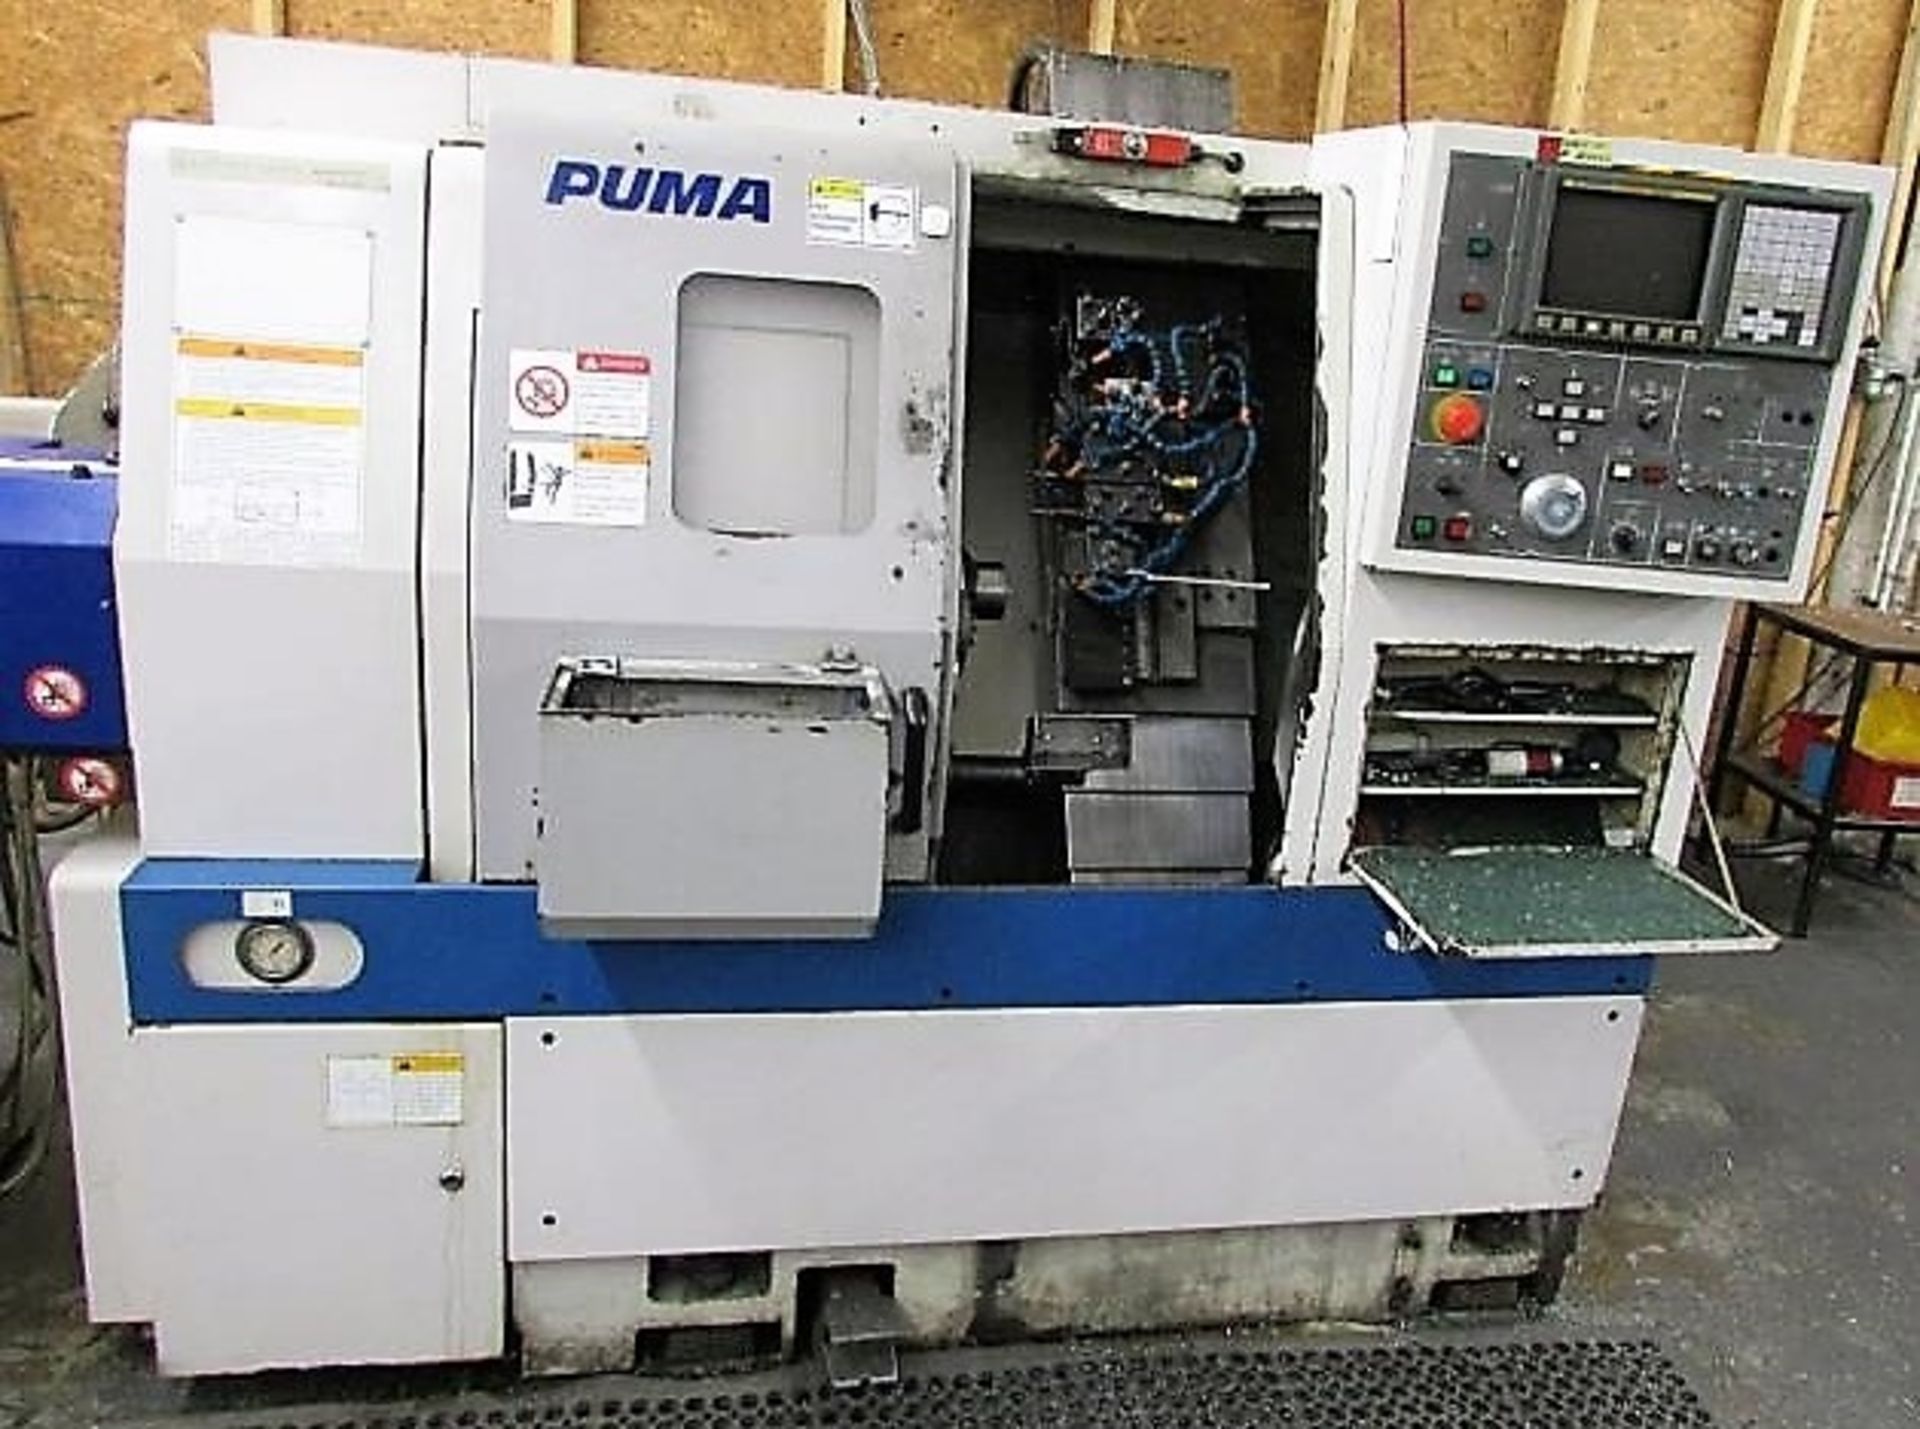 Daewoo Puma 160GT 2-Axis CNC Gang Turn Turning Center Lathe, S/N PL160-0220, New 2002 - Image 2 of 12